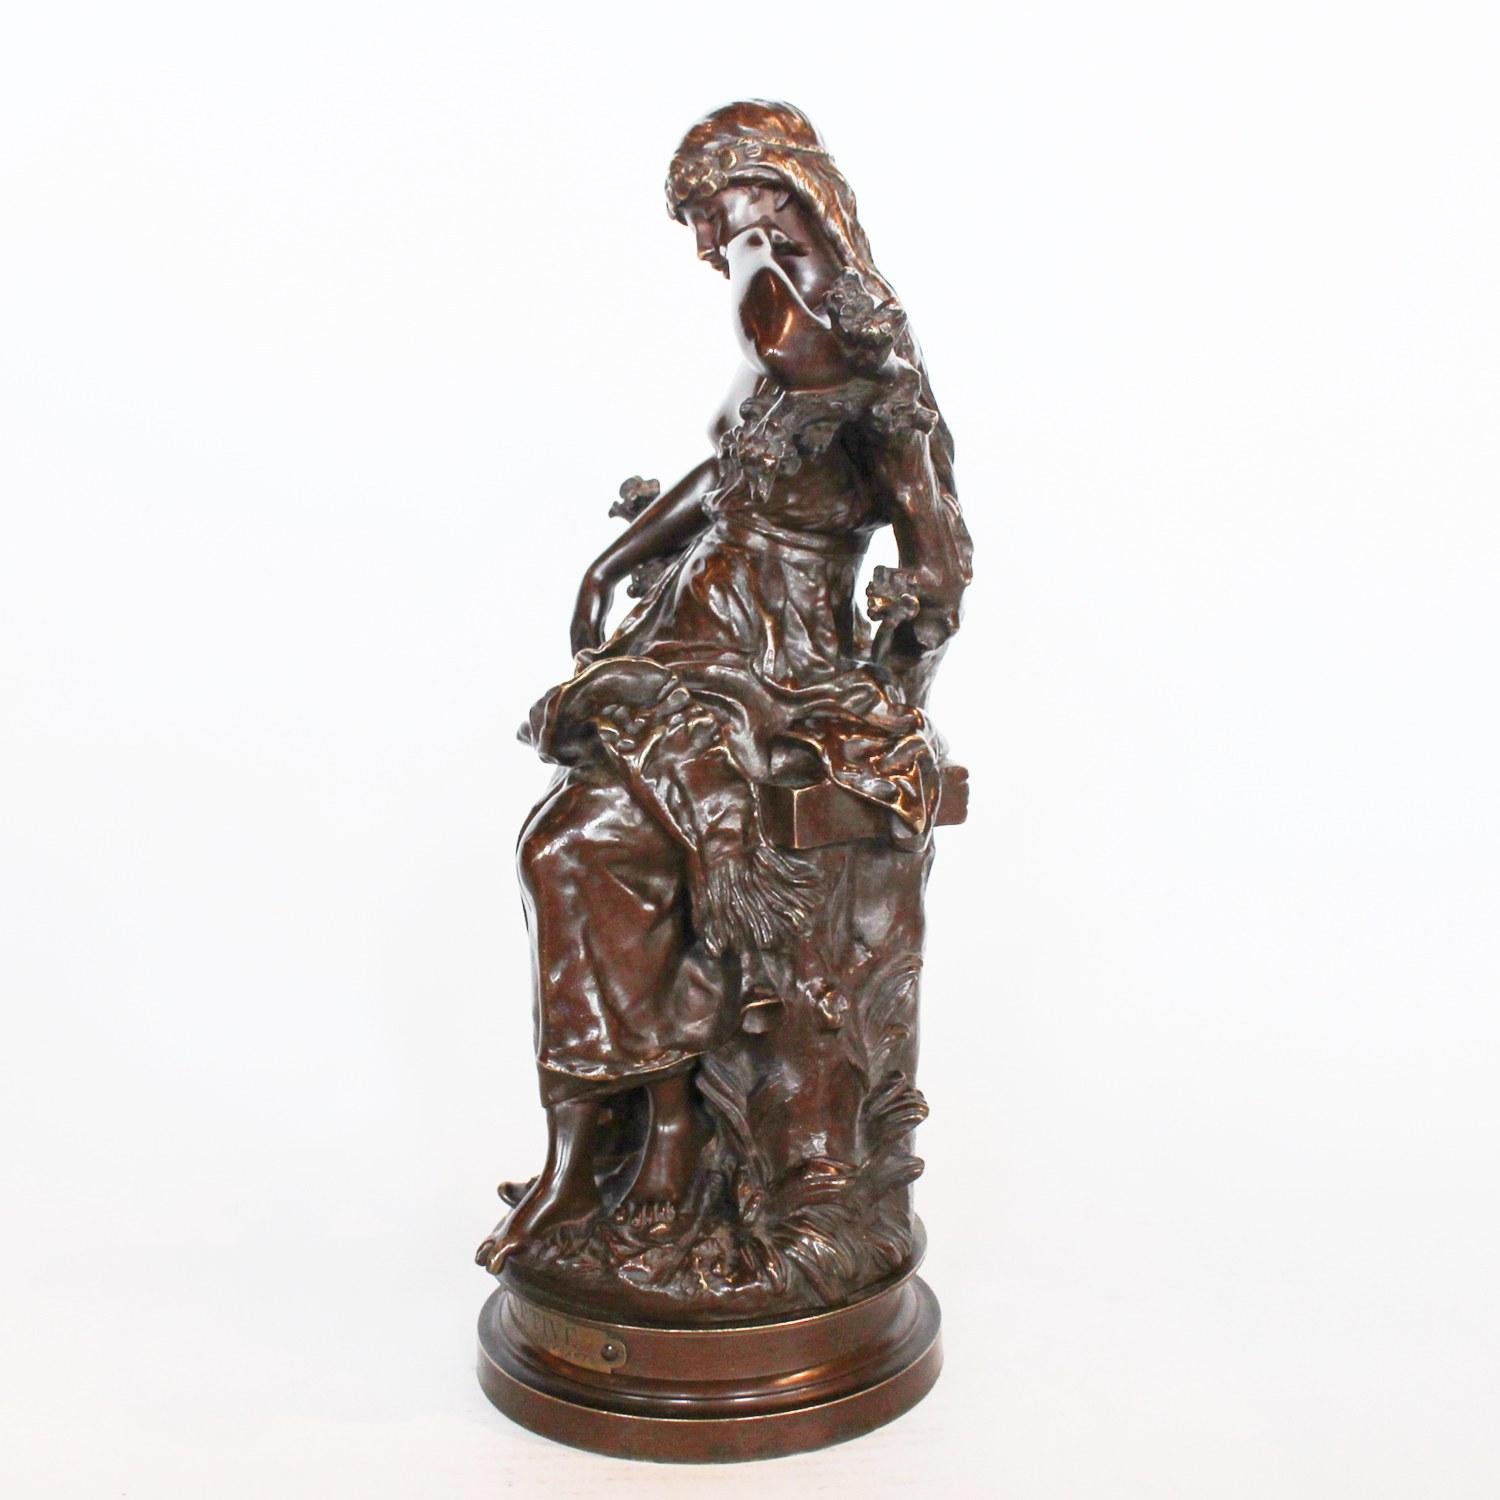 Captive, an Art Nouveau rich brown patinated bronze figure of a scantily clad young lady. Signed Hip Moreau to cast, and with title plaque to front.



